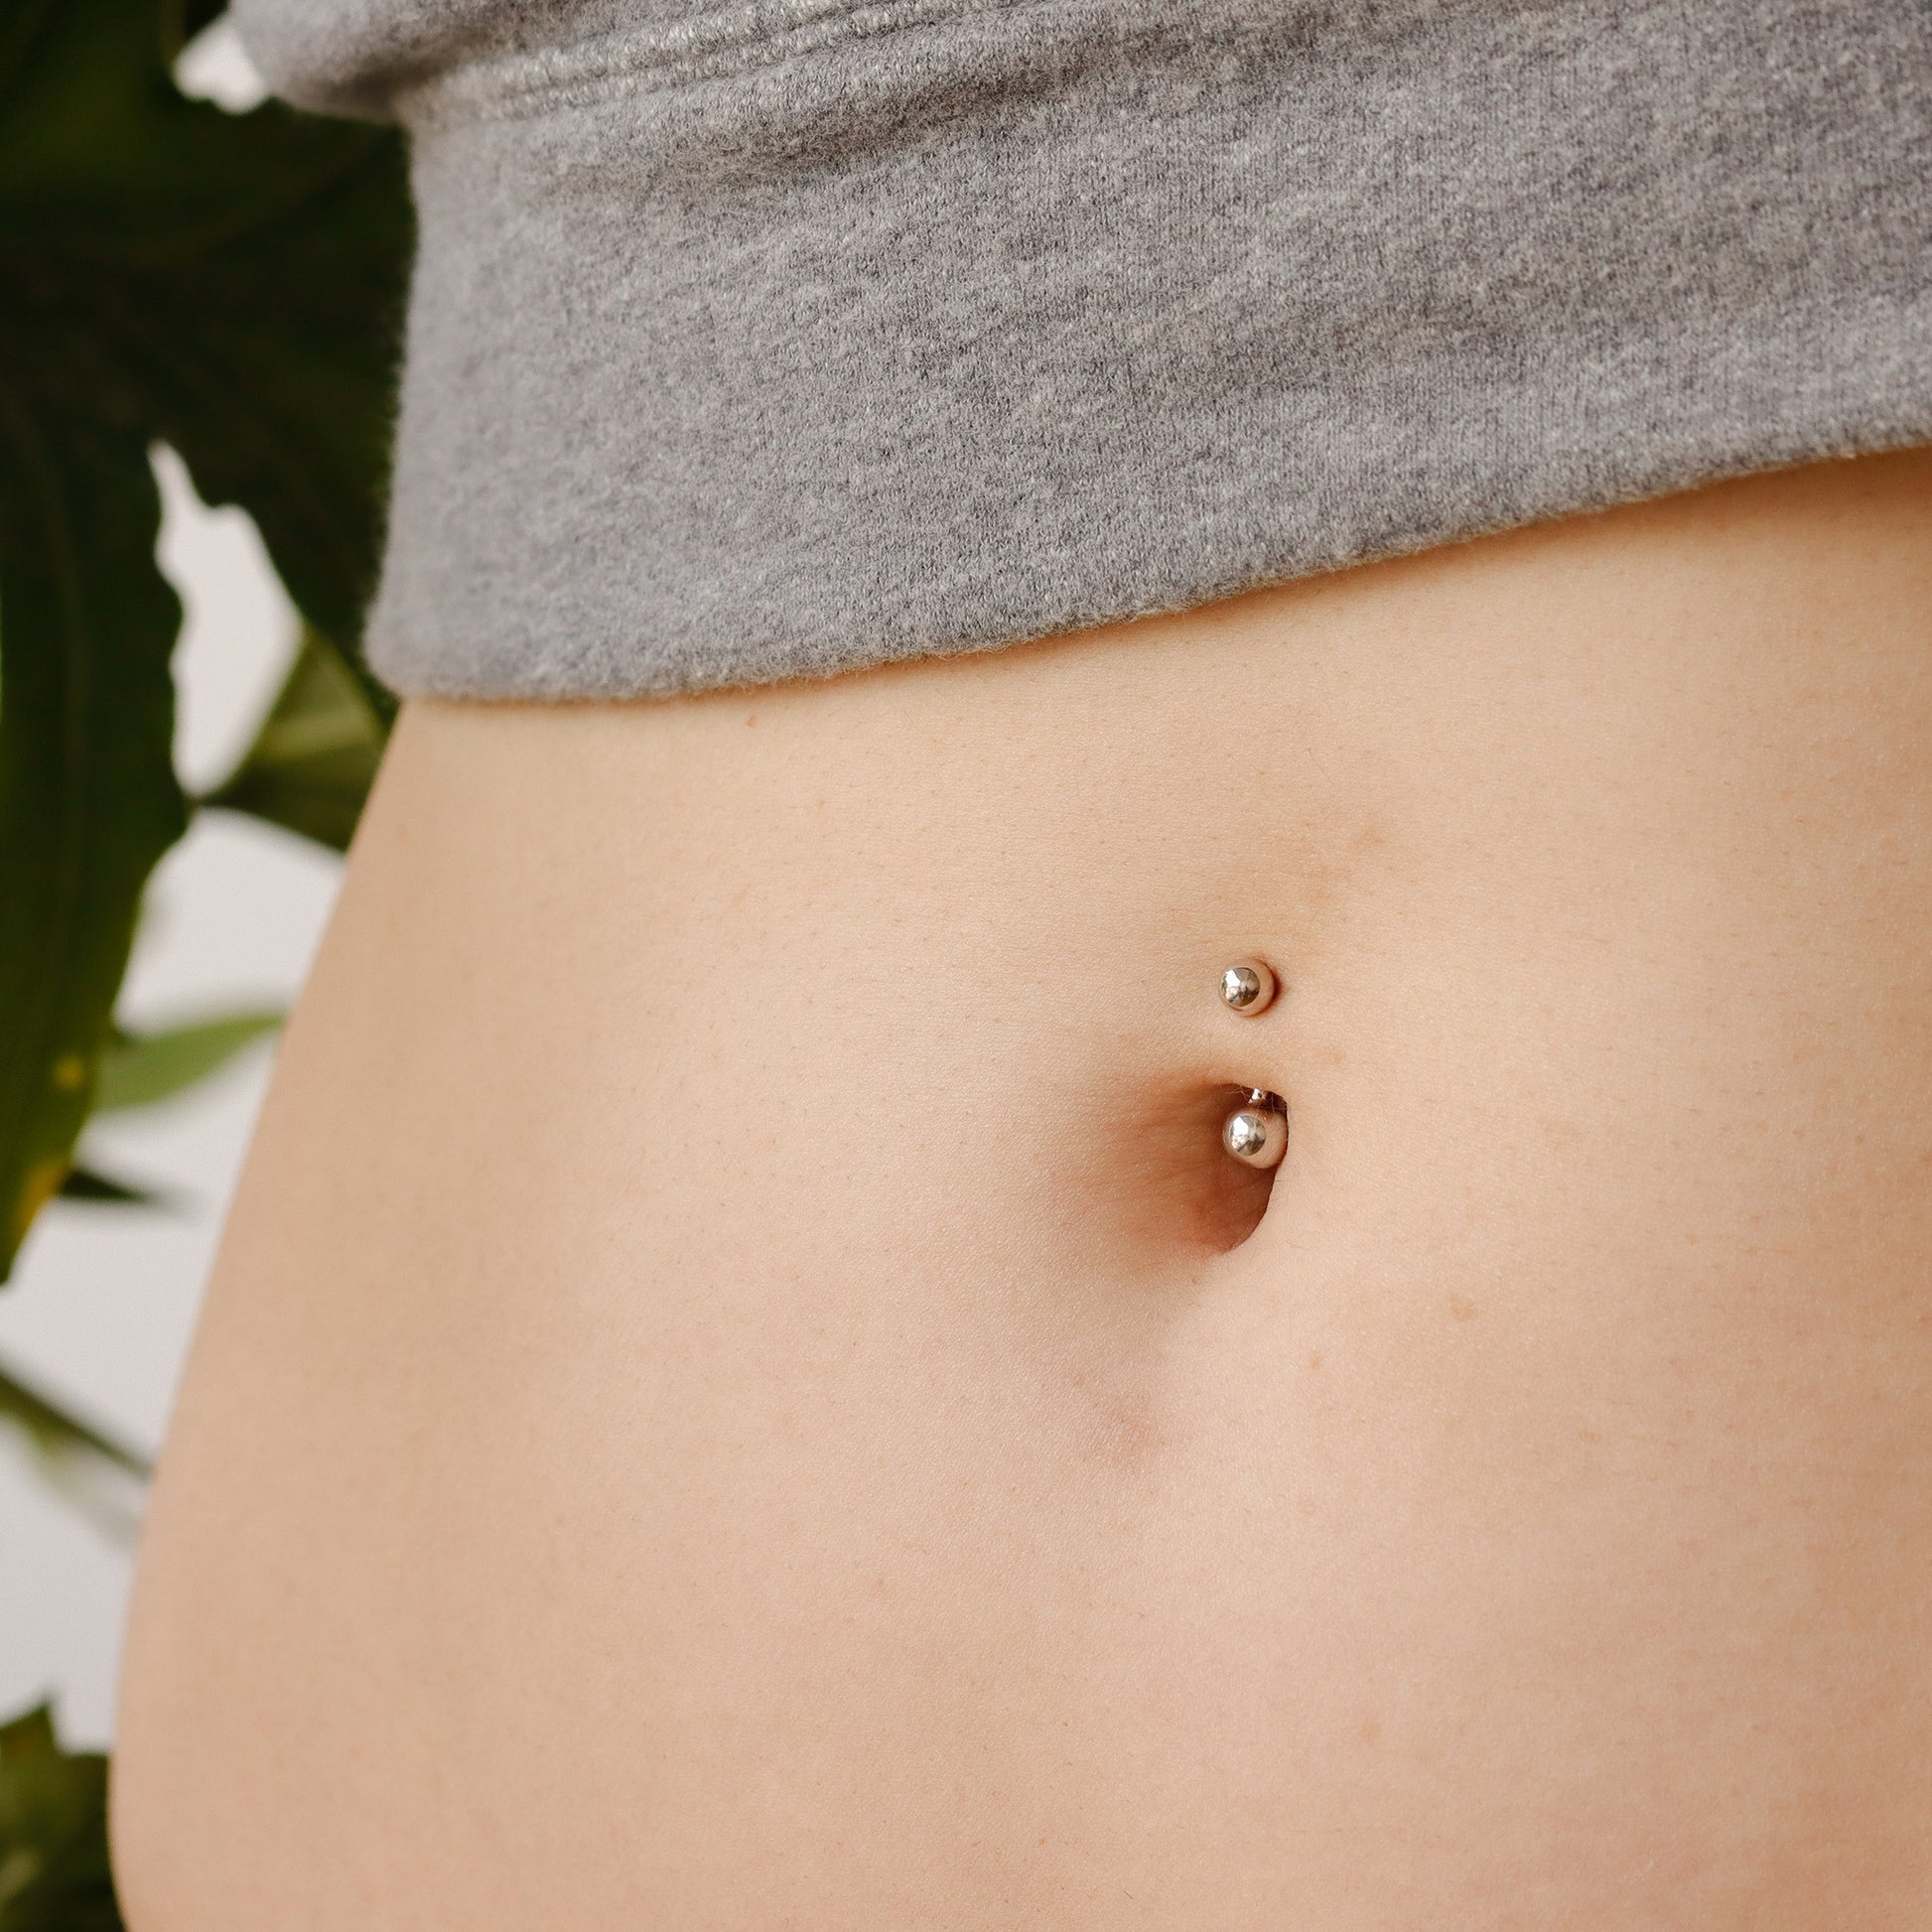 Solid 925 Silver | 16G/14G Tiny Classic Ball Belly Ring | 6mm 1/4" 8mm 5/16" 10mm 3/8" - Sturdy South